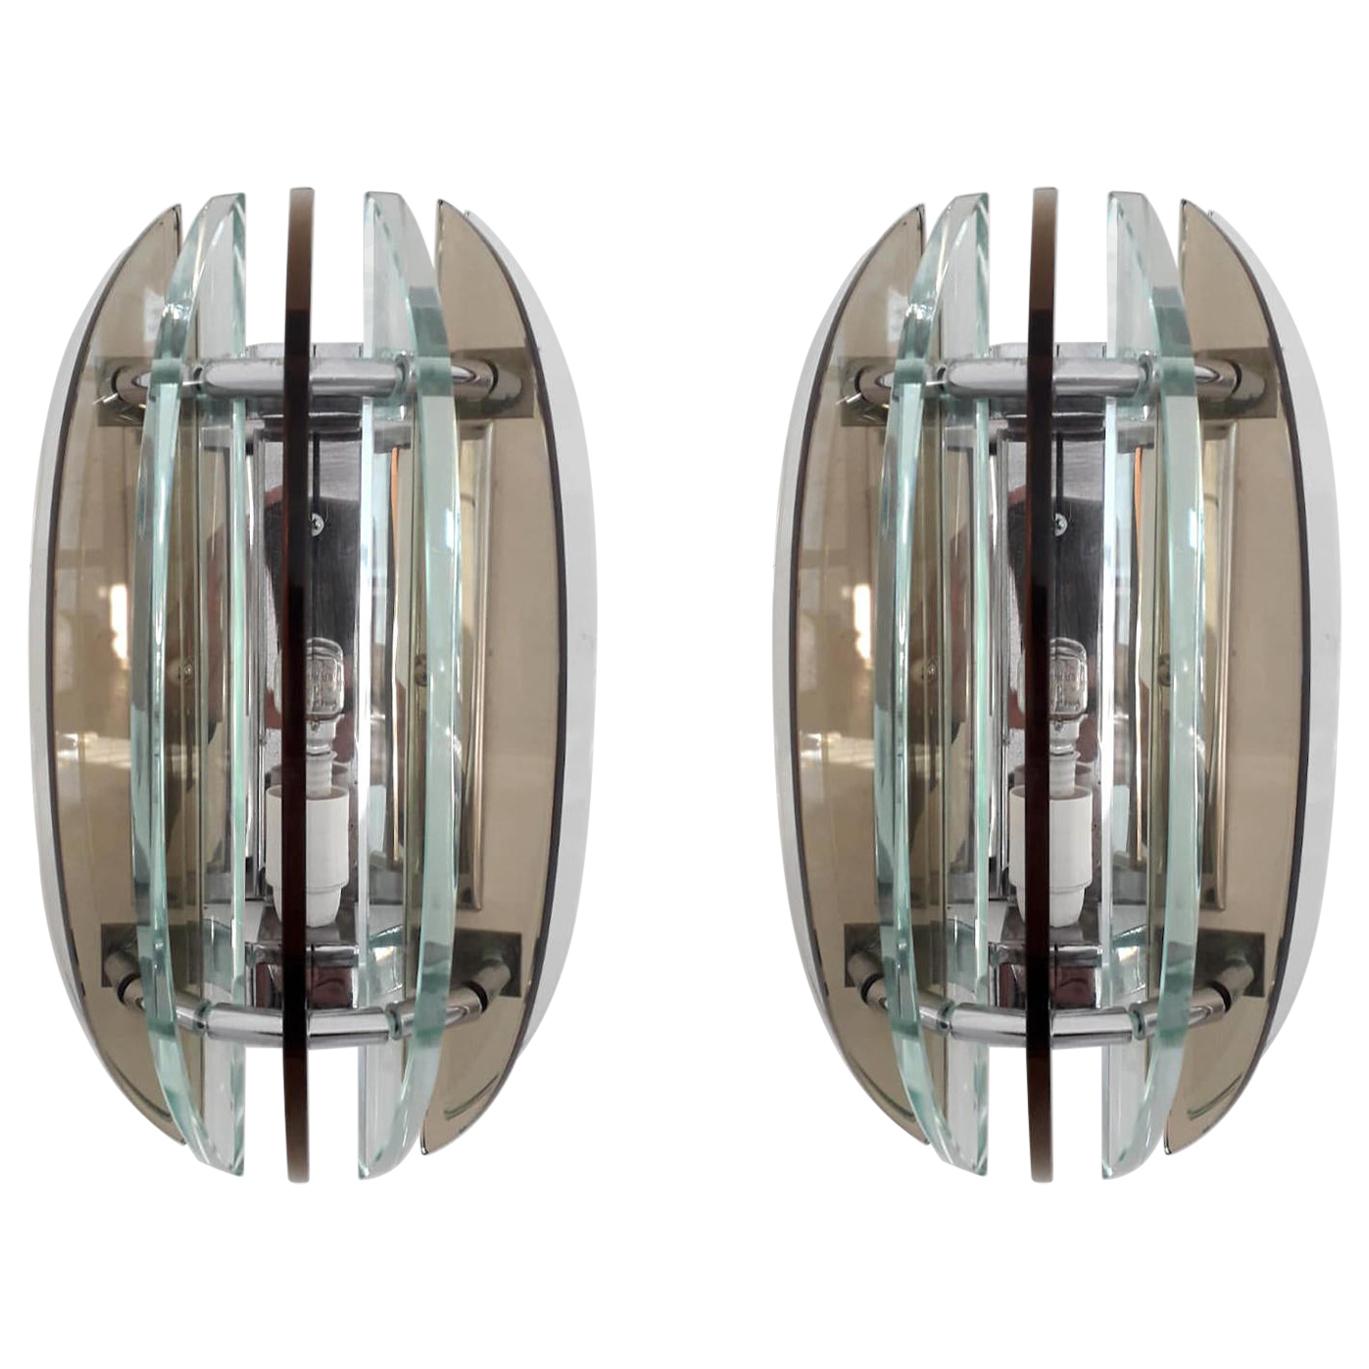 Pair of Beveled Sconces by Veca For Sale